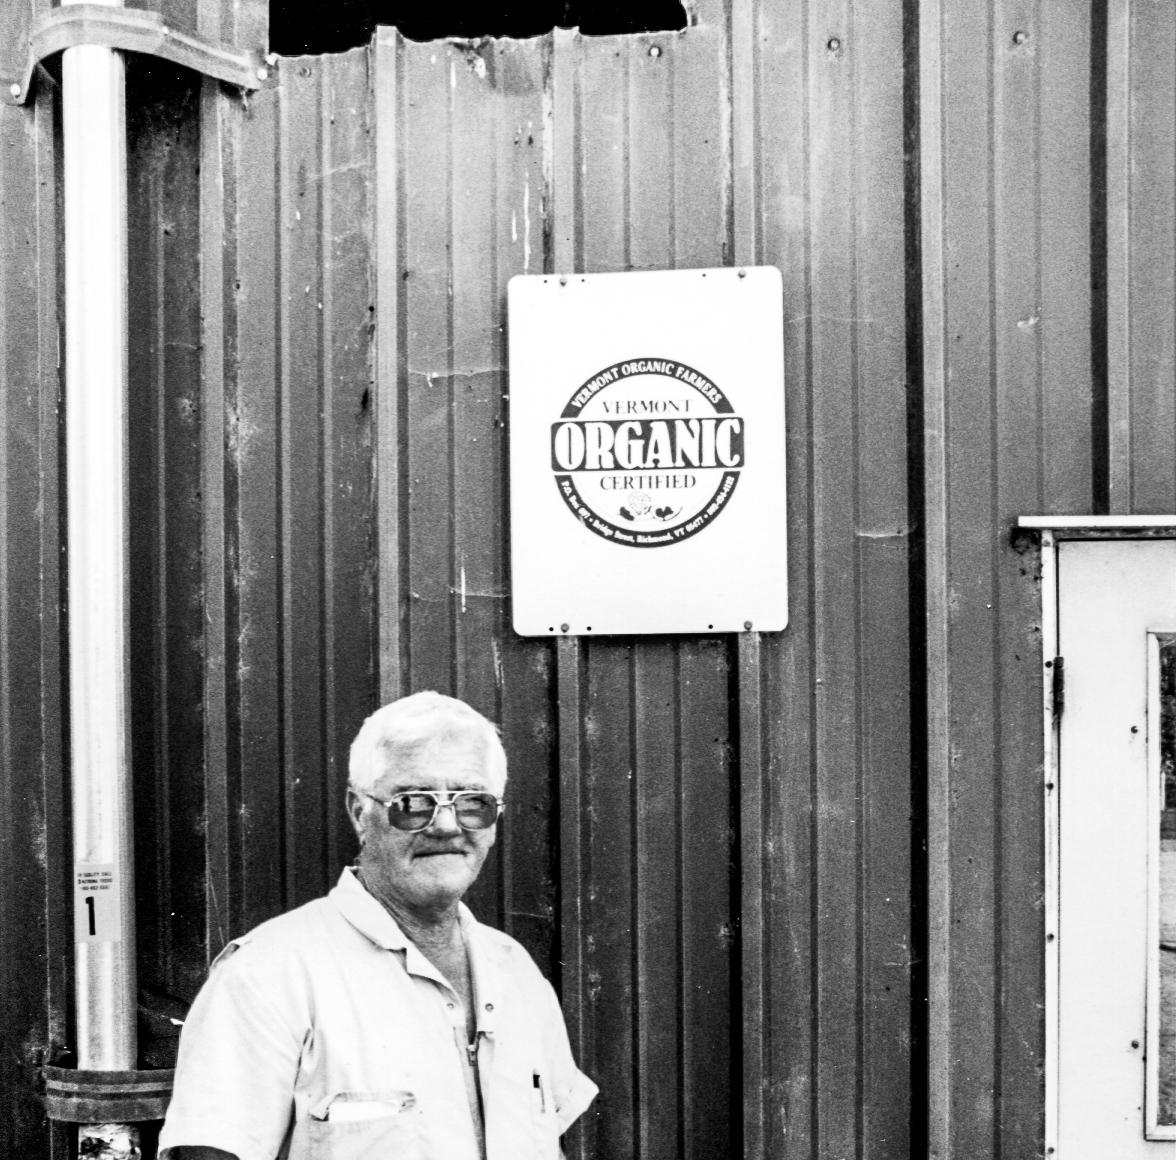 Black and white photo of a man standing in front of a barn that has a sign showing an old VOF logo.